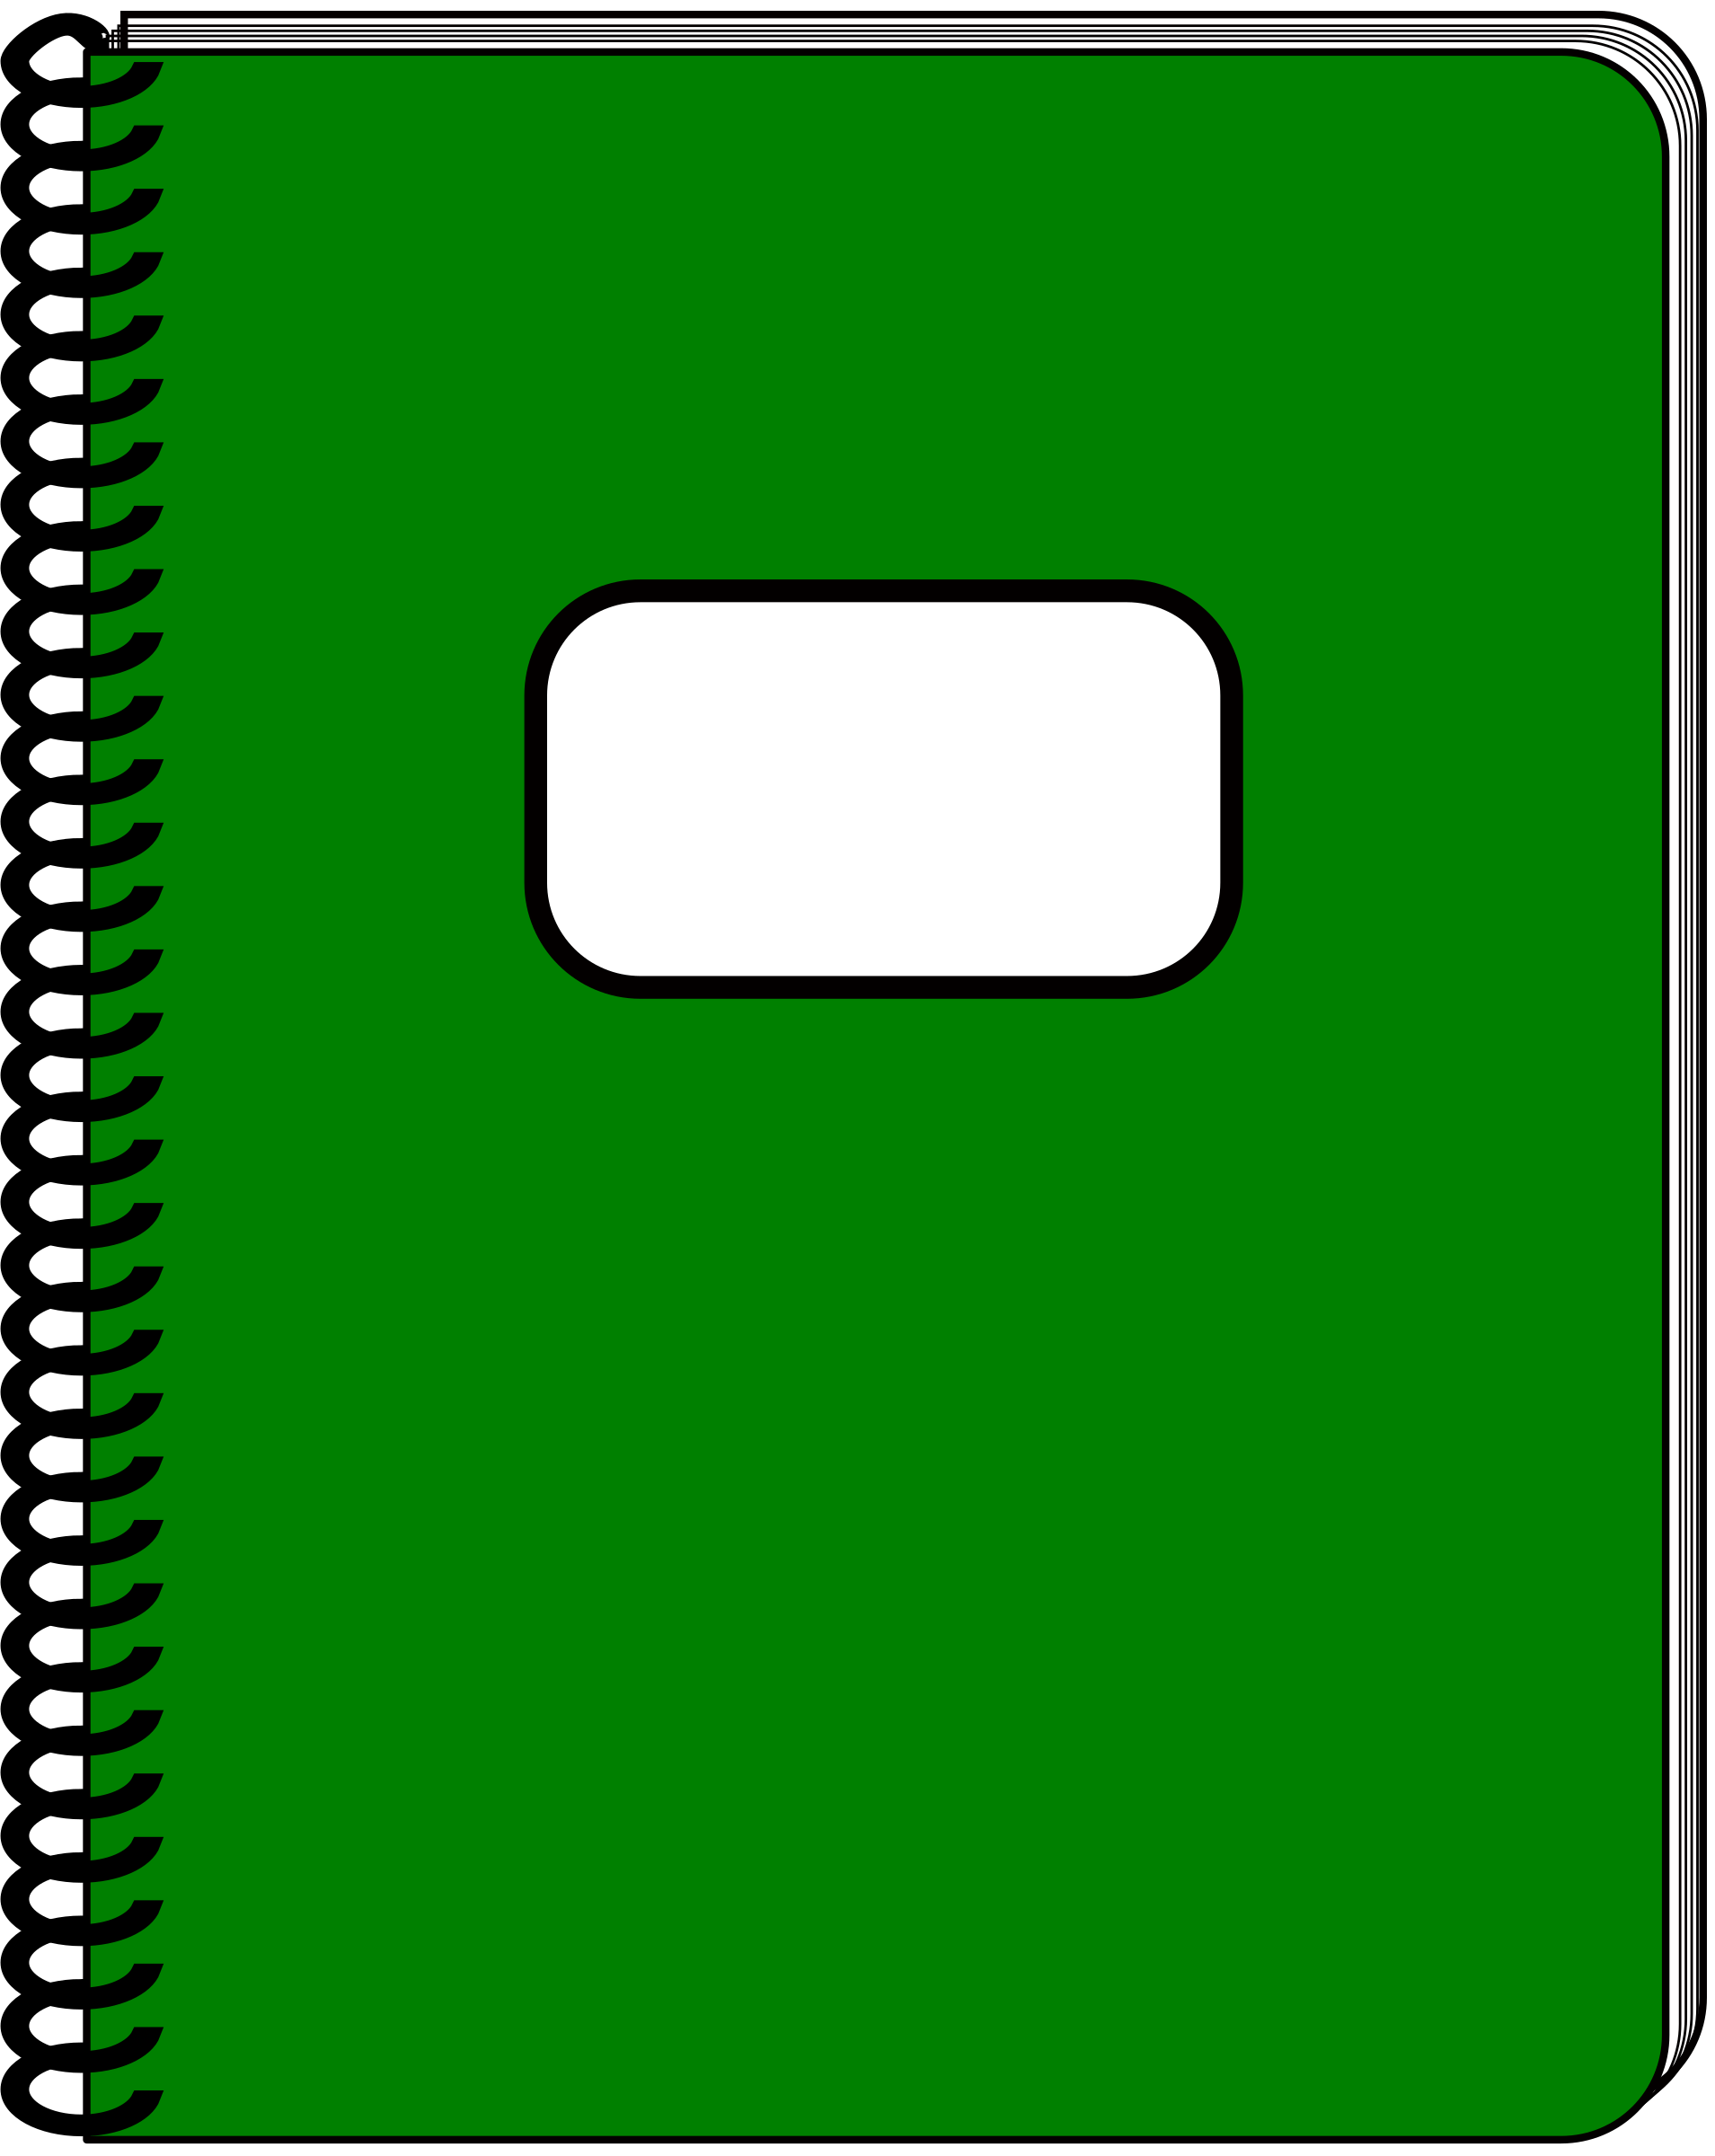 clipart of notebook - photo #18